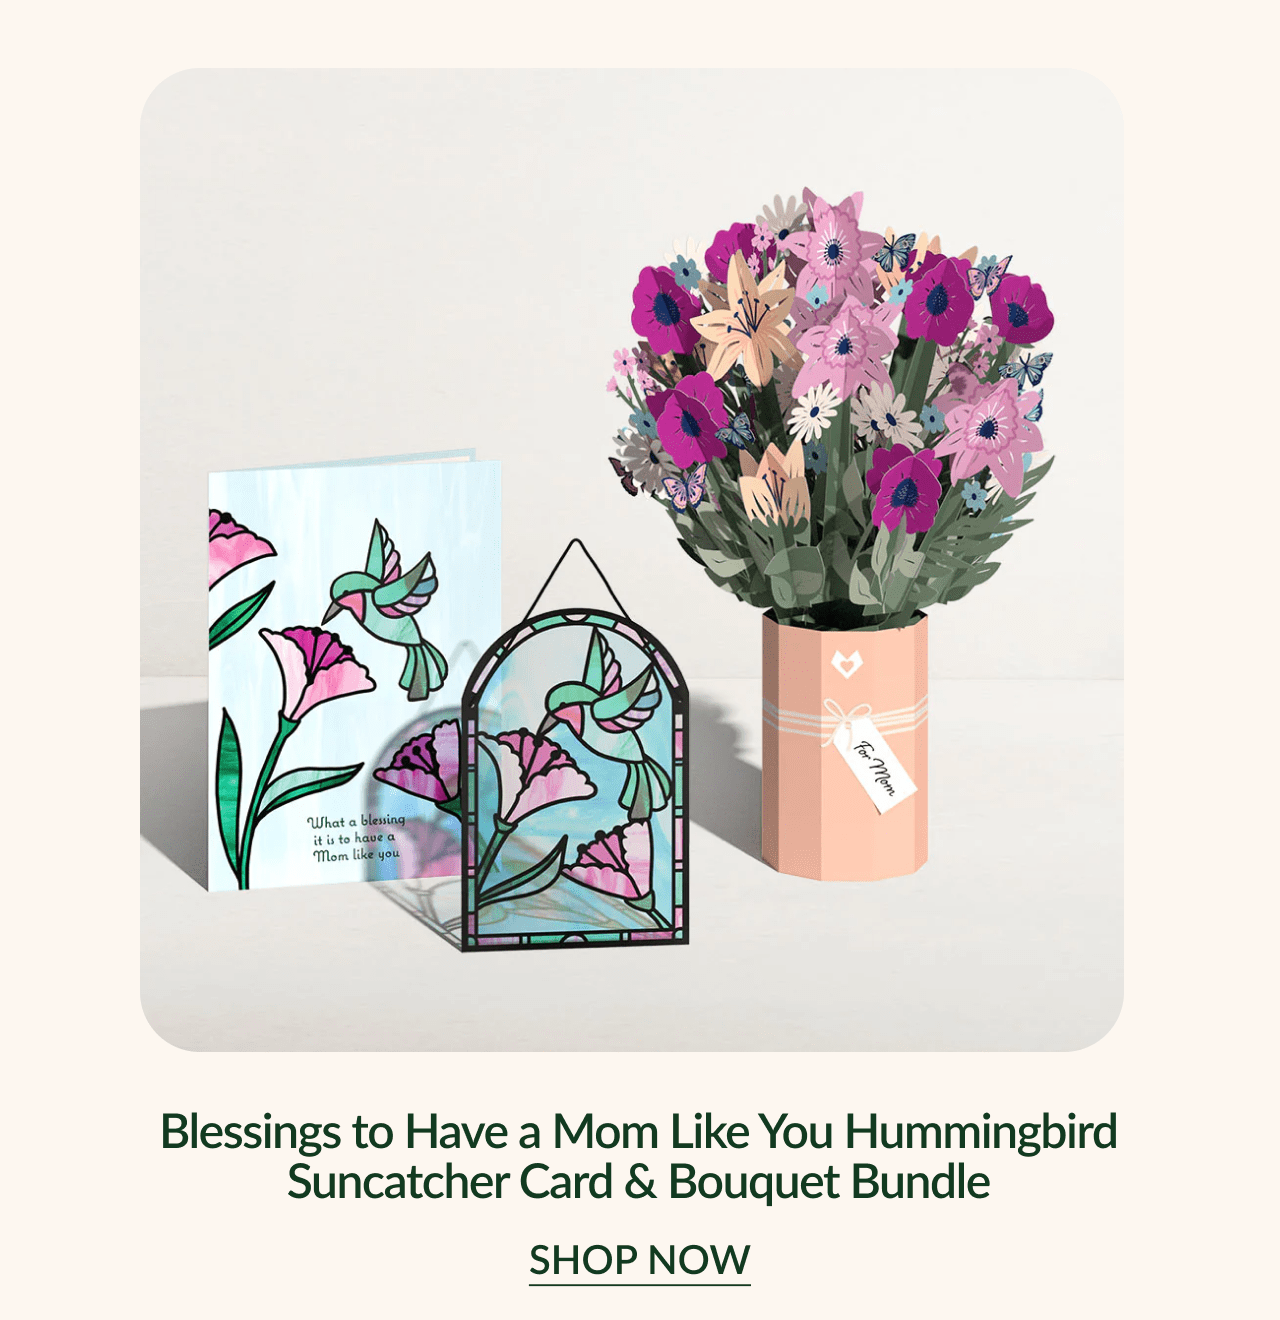 Blessings to Have a Mom Like You Hummingbird Suncatcher Card & Bouquet Bundle | SHOP NOW